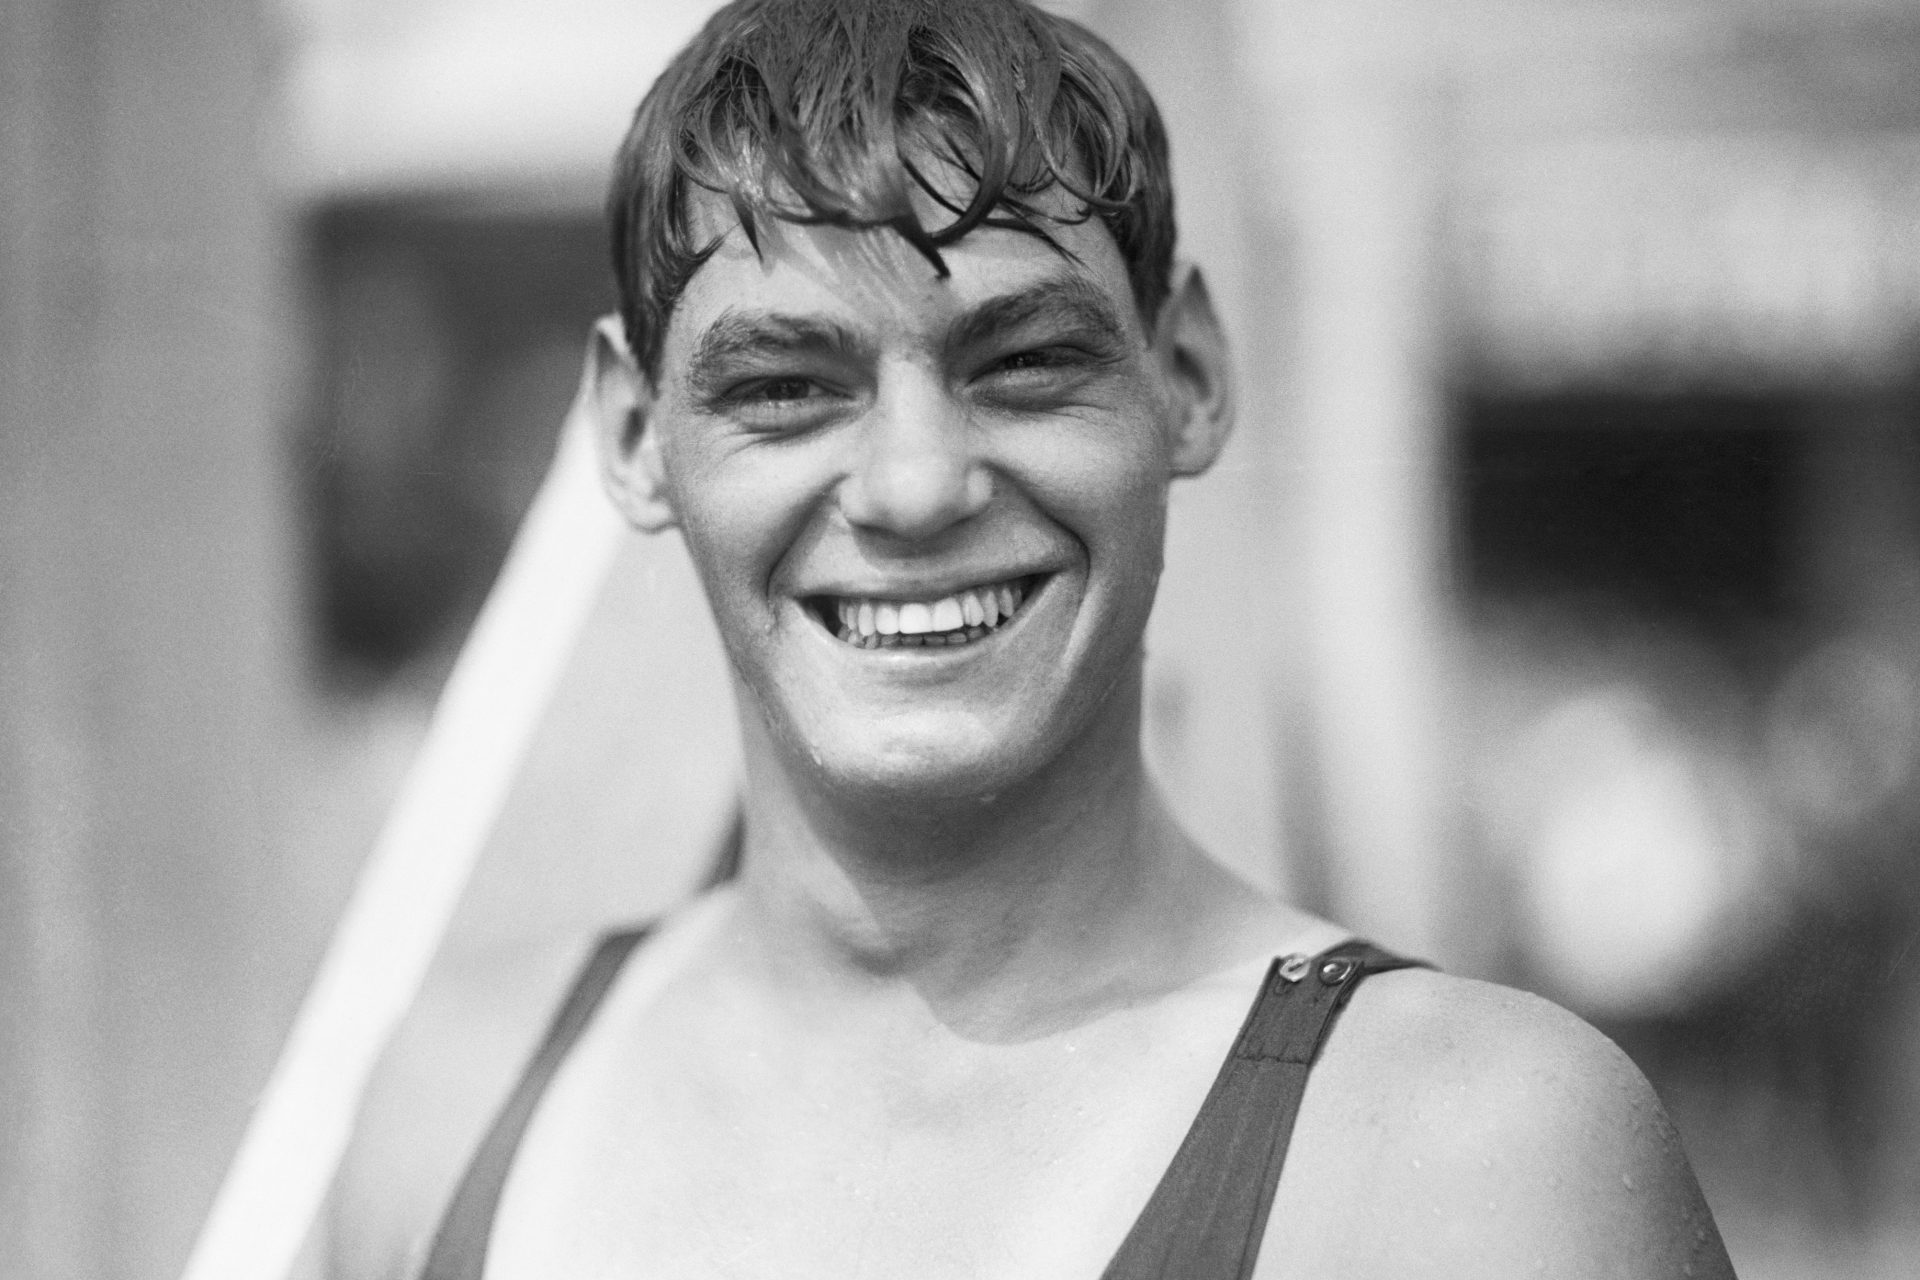 The crazy story of Johnny Weissmuller, the unbeaten swimmer who became Tarzan